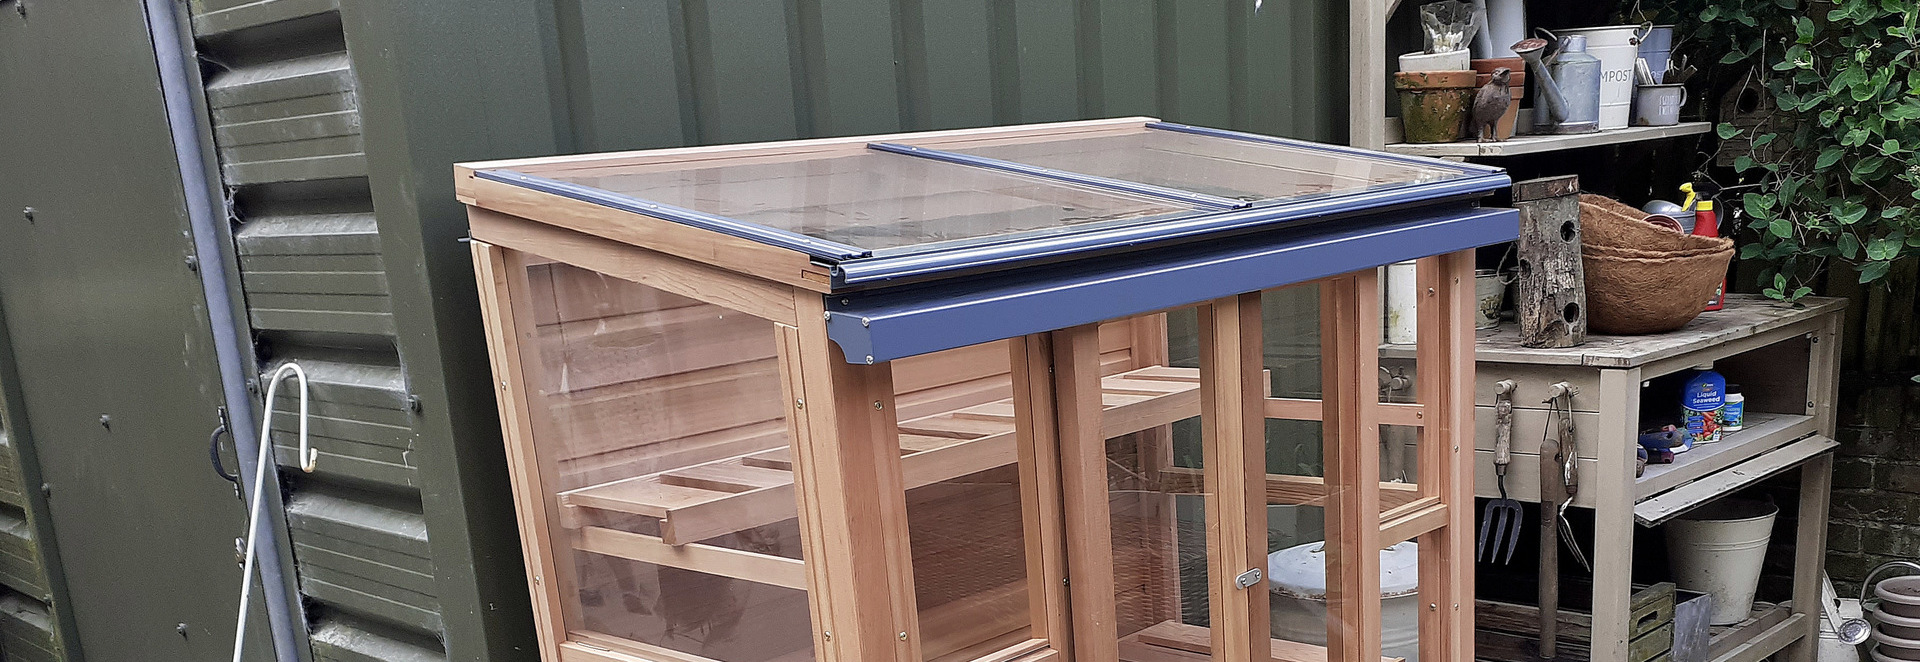 The Gabriel Ash Grand Upright Coldframe made with Western Red Cedar with two toughened glass lids and sliding doors | Supplied + fitted in Newbridge, Co Kildare.  Owen Chubb 087-2306 128